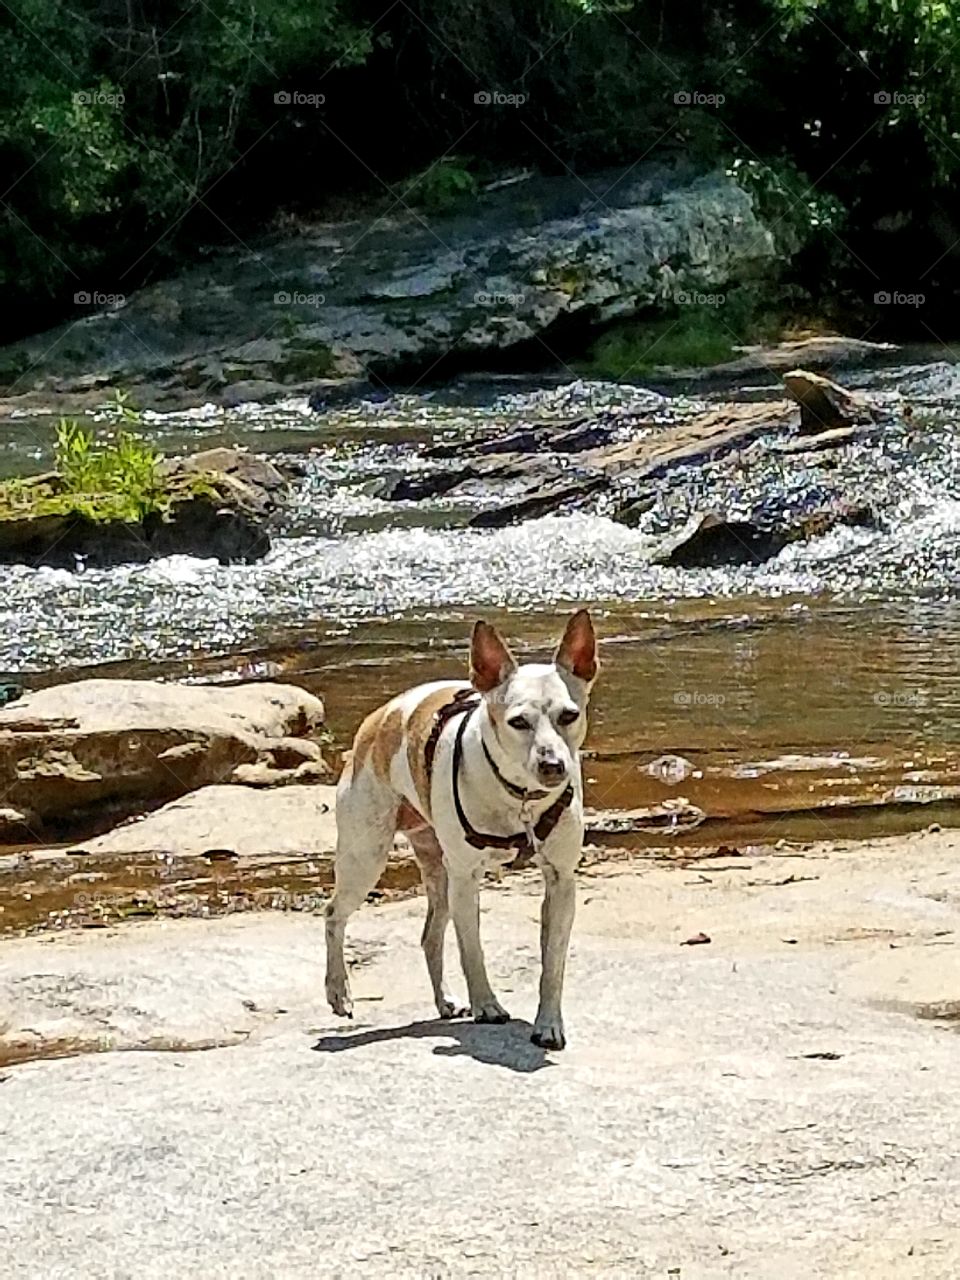 Hiking with Pixie Moon 
5/11/2018